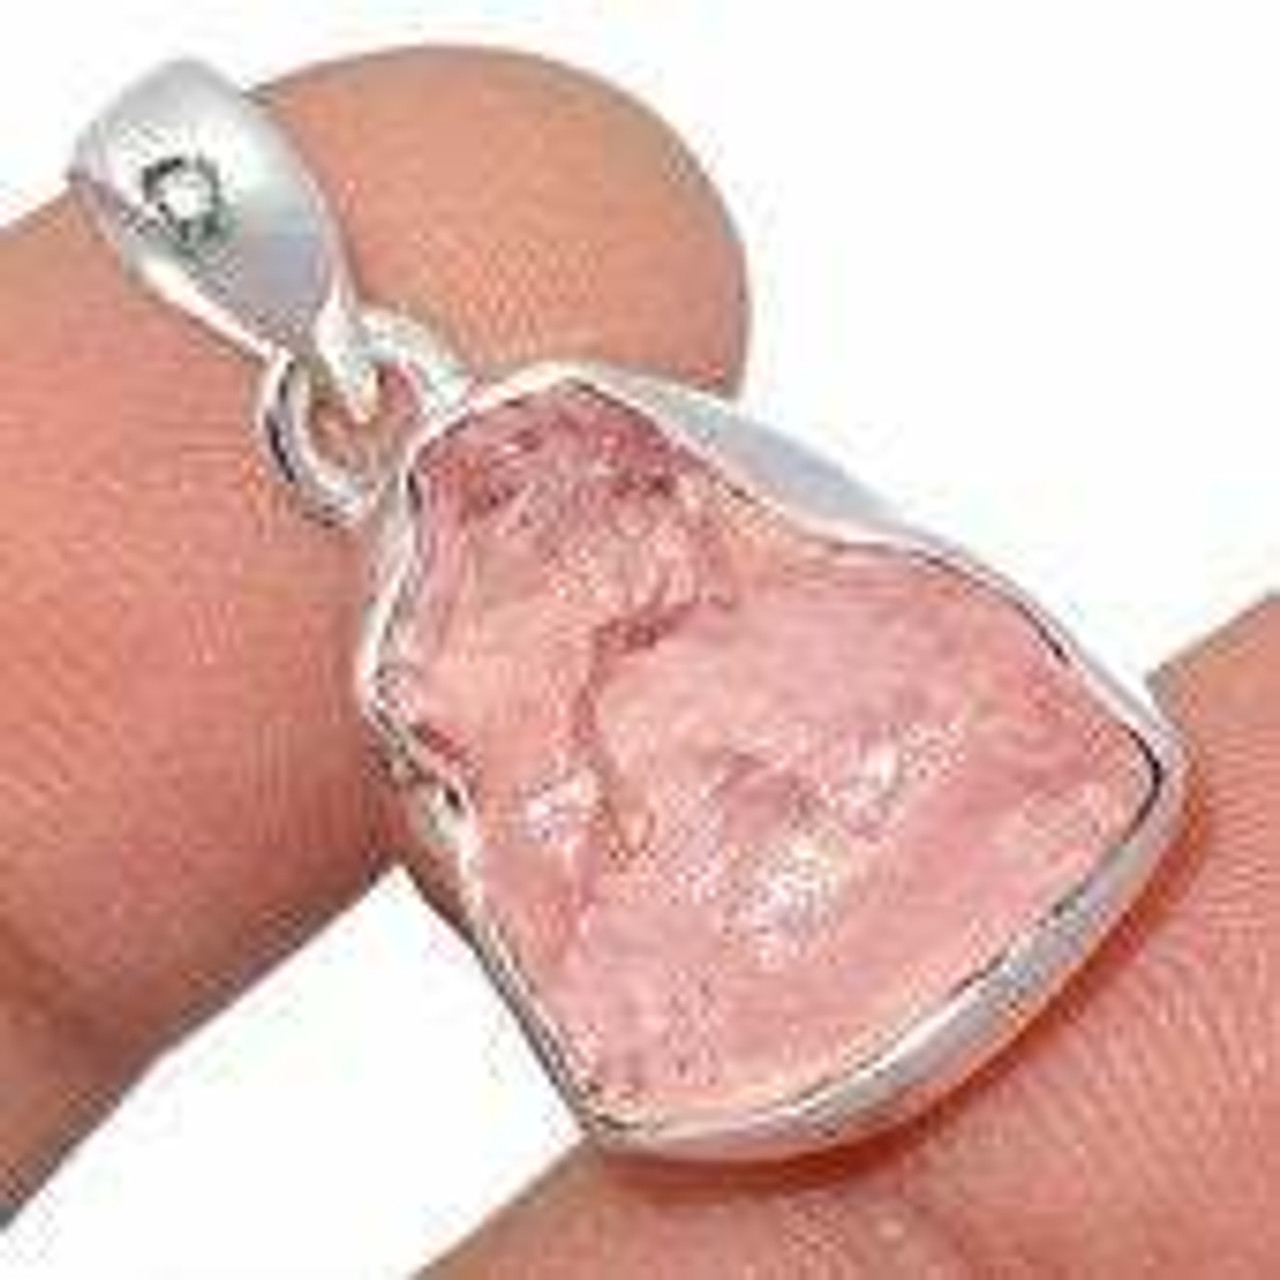 Rose quartz pendant with sterling silver setting